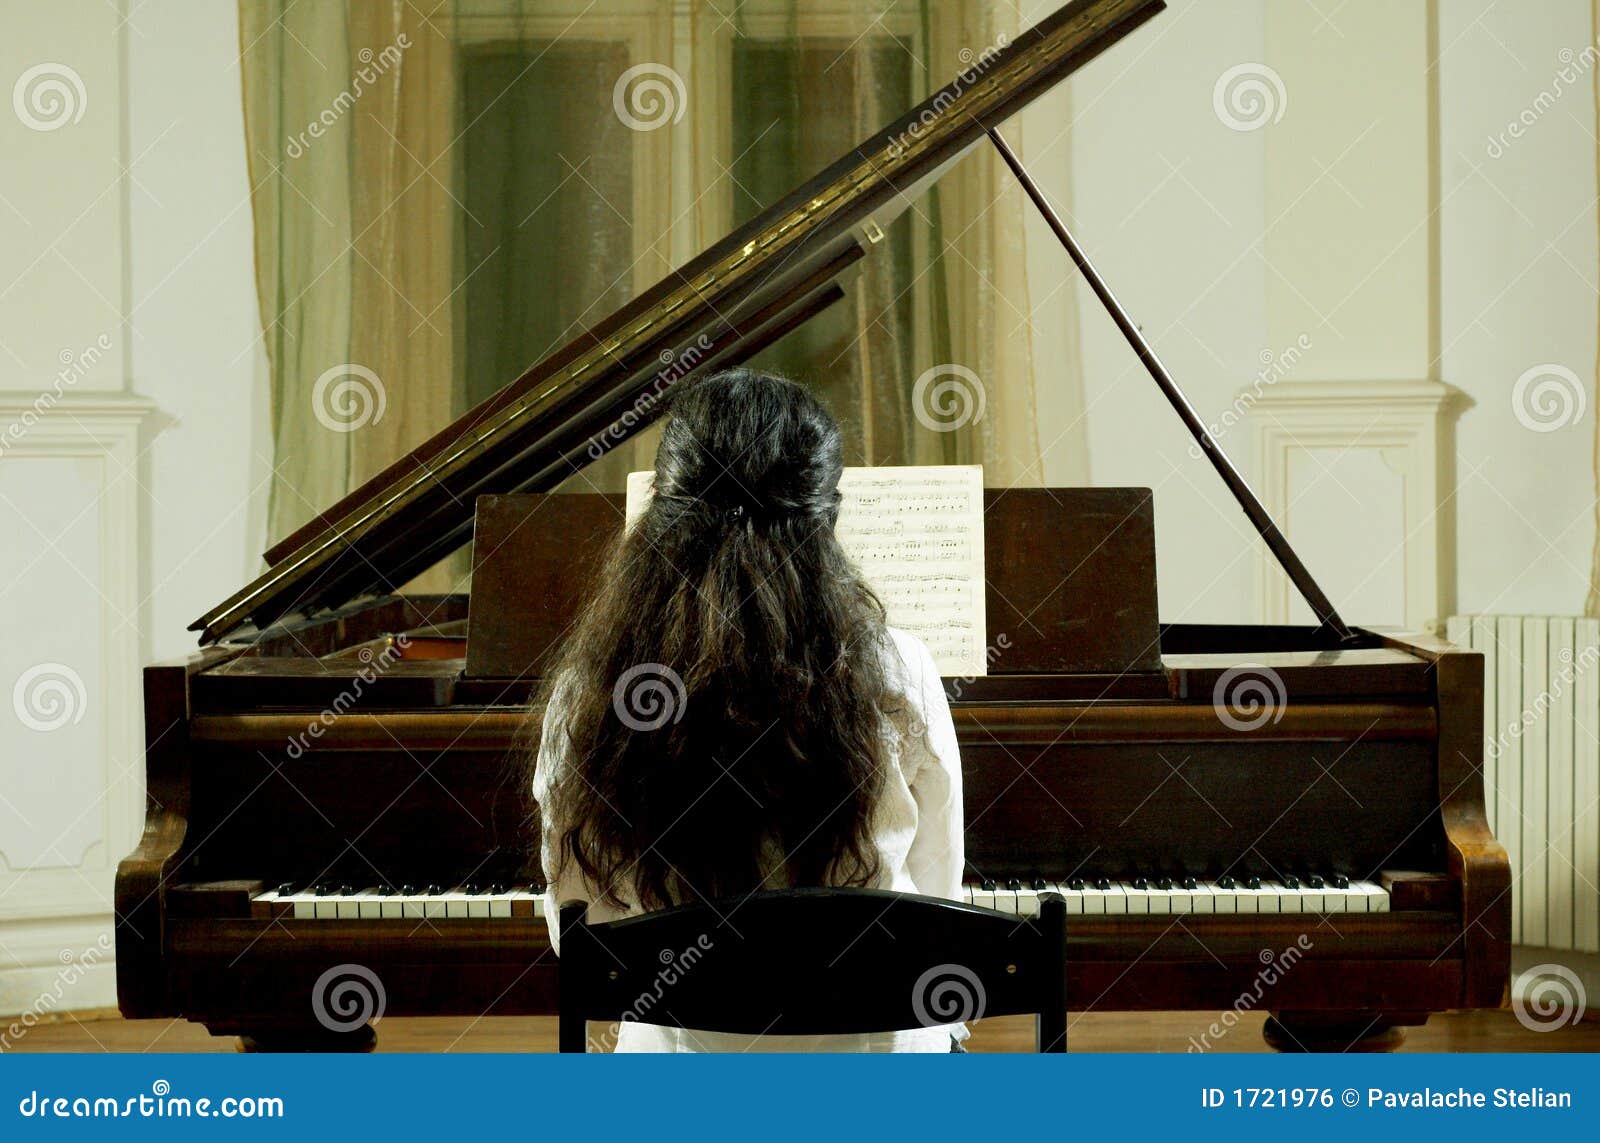 concert pianist at the piano